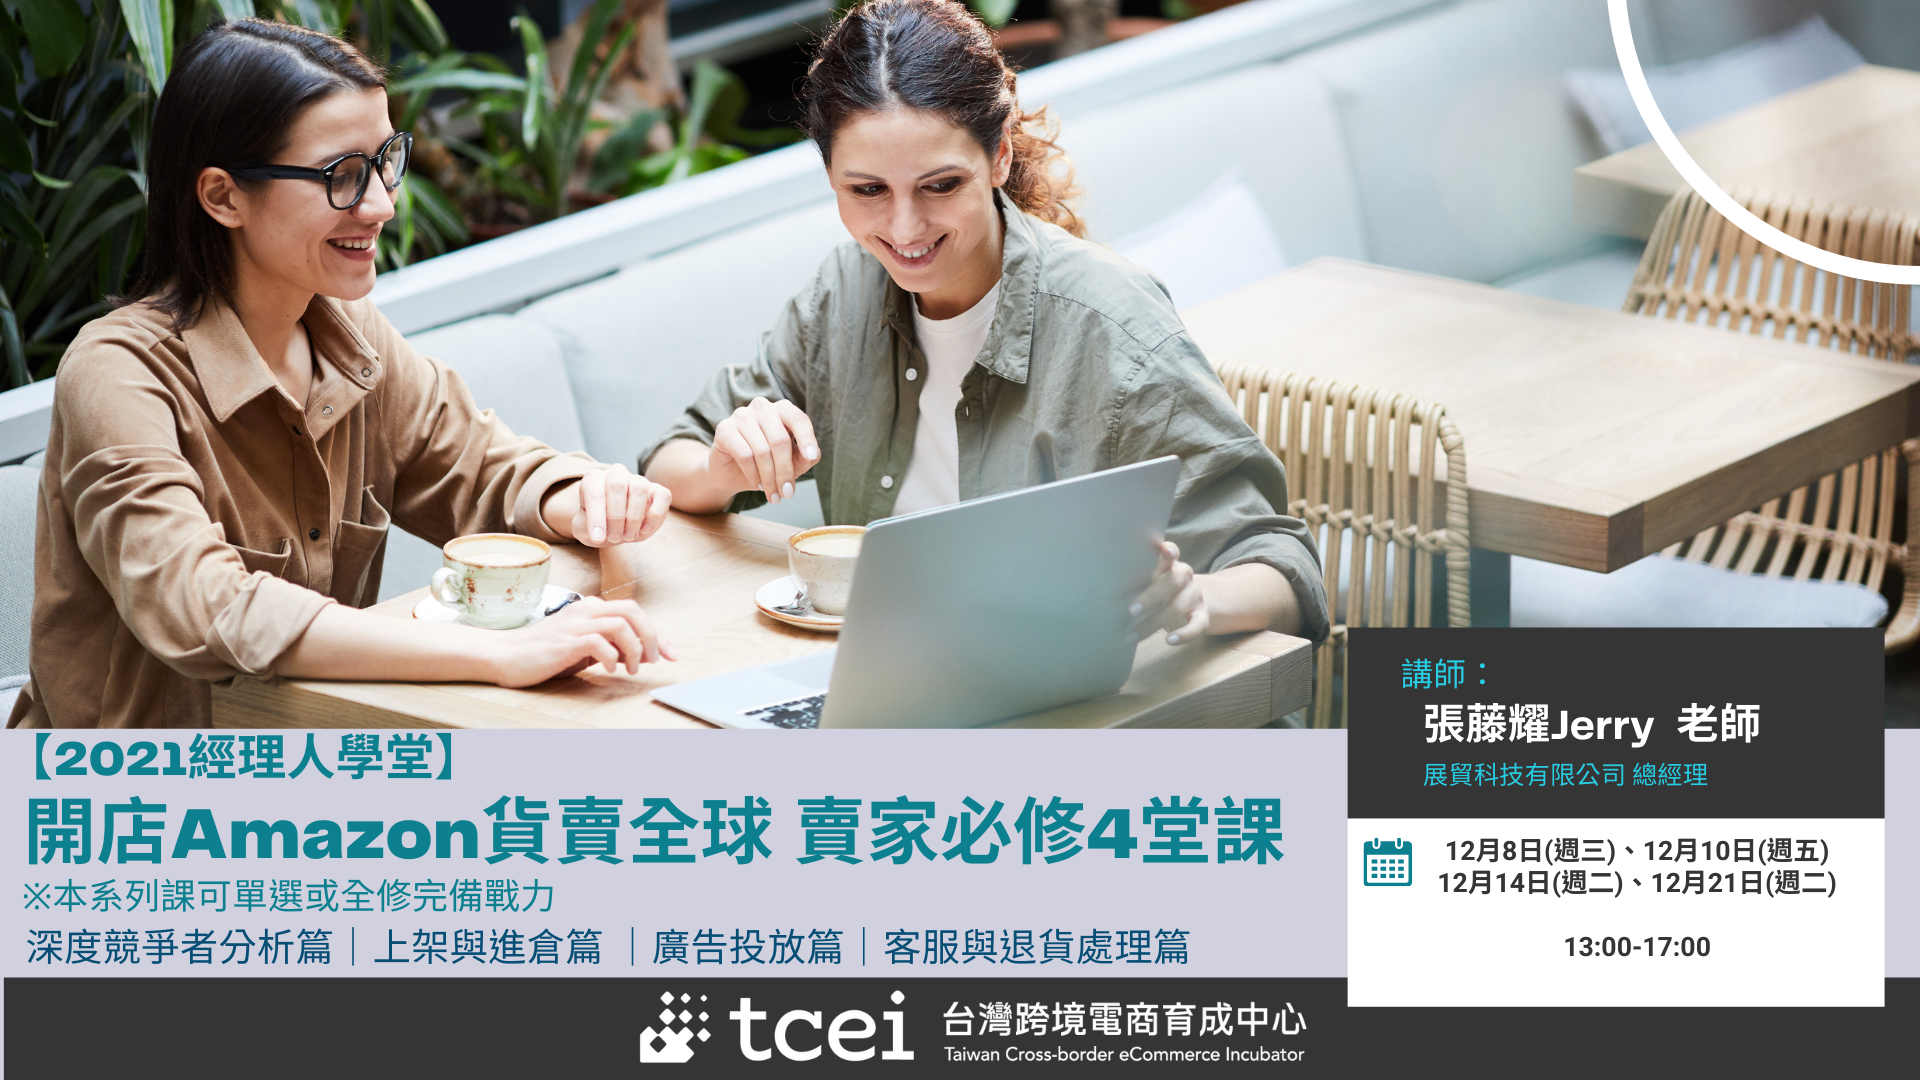 Copy of tcei課程-edm-banner (4).png